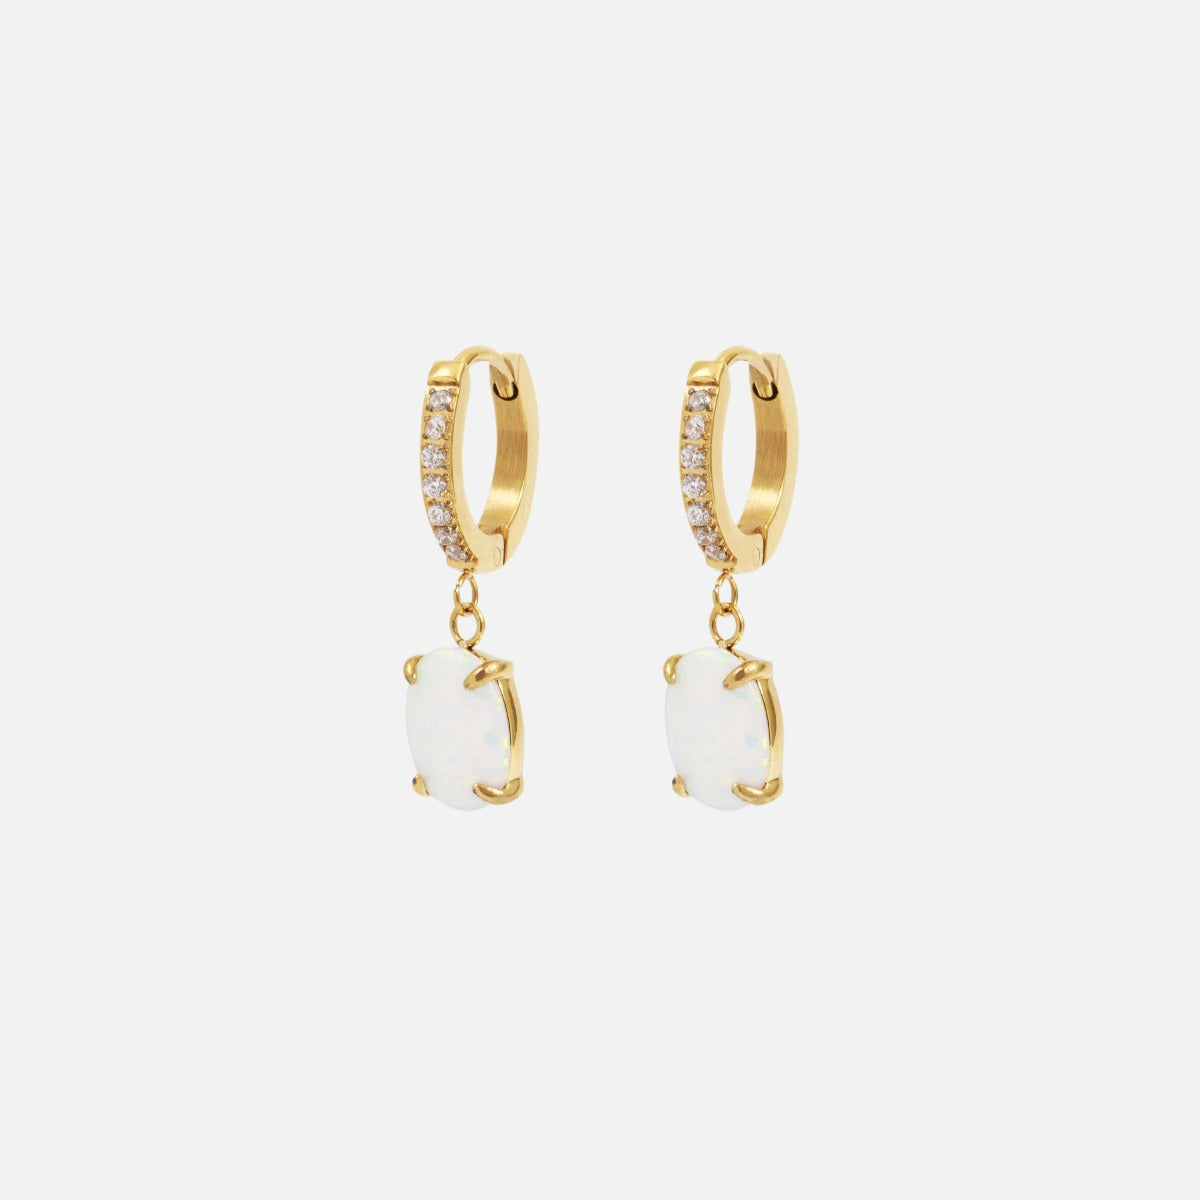 Golden stainless steel huggies earrings with opal effect charm